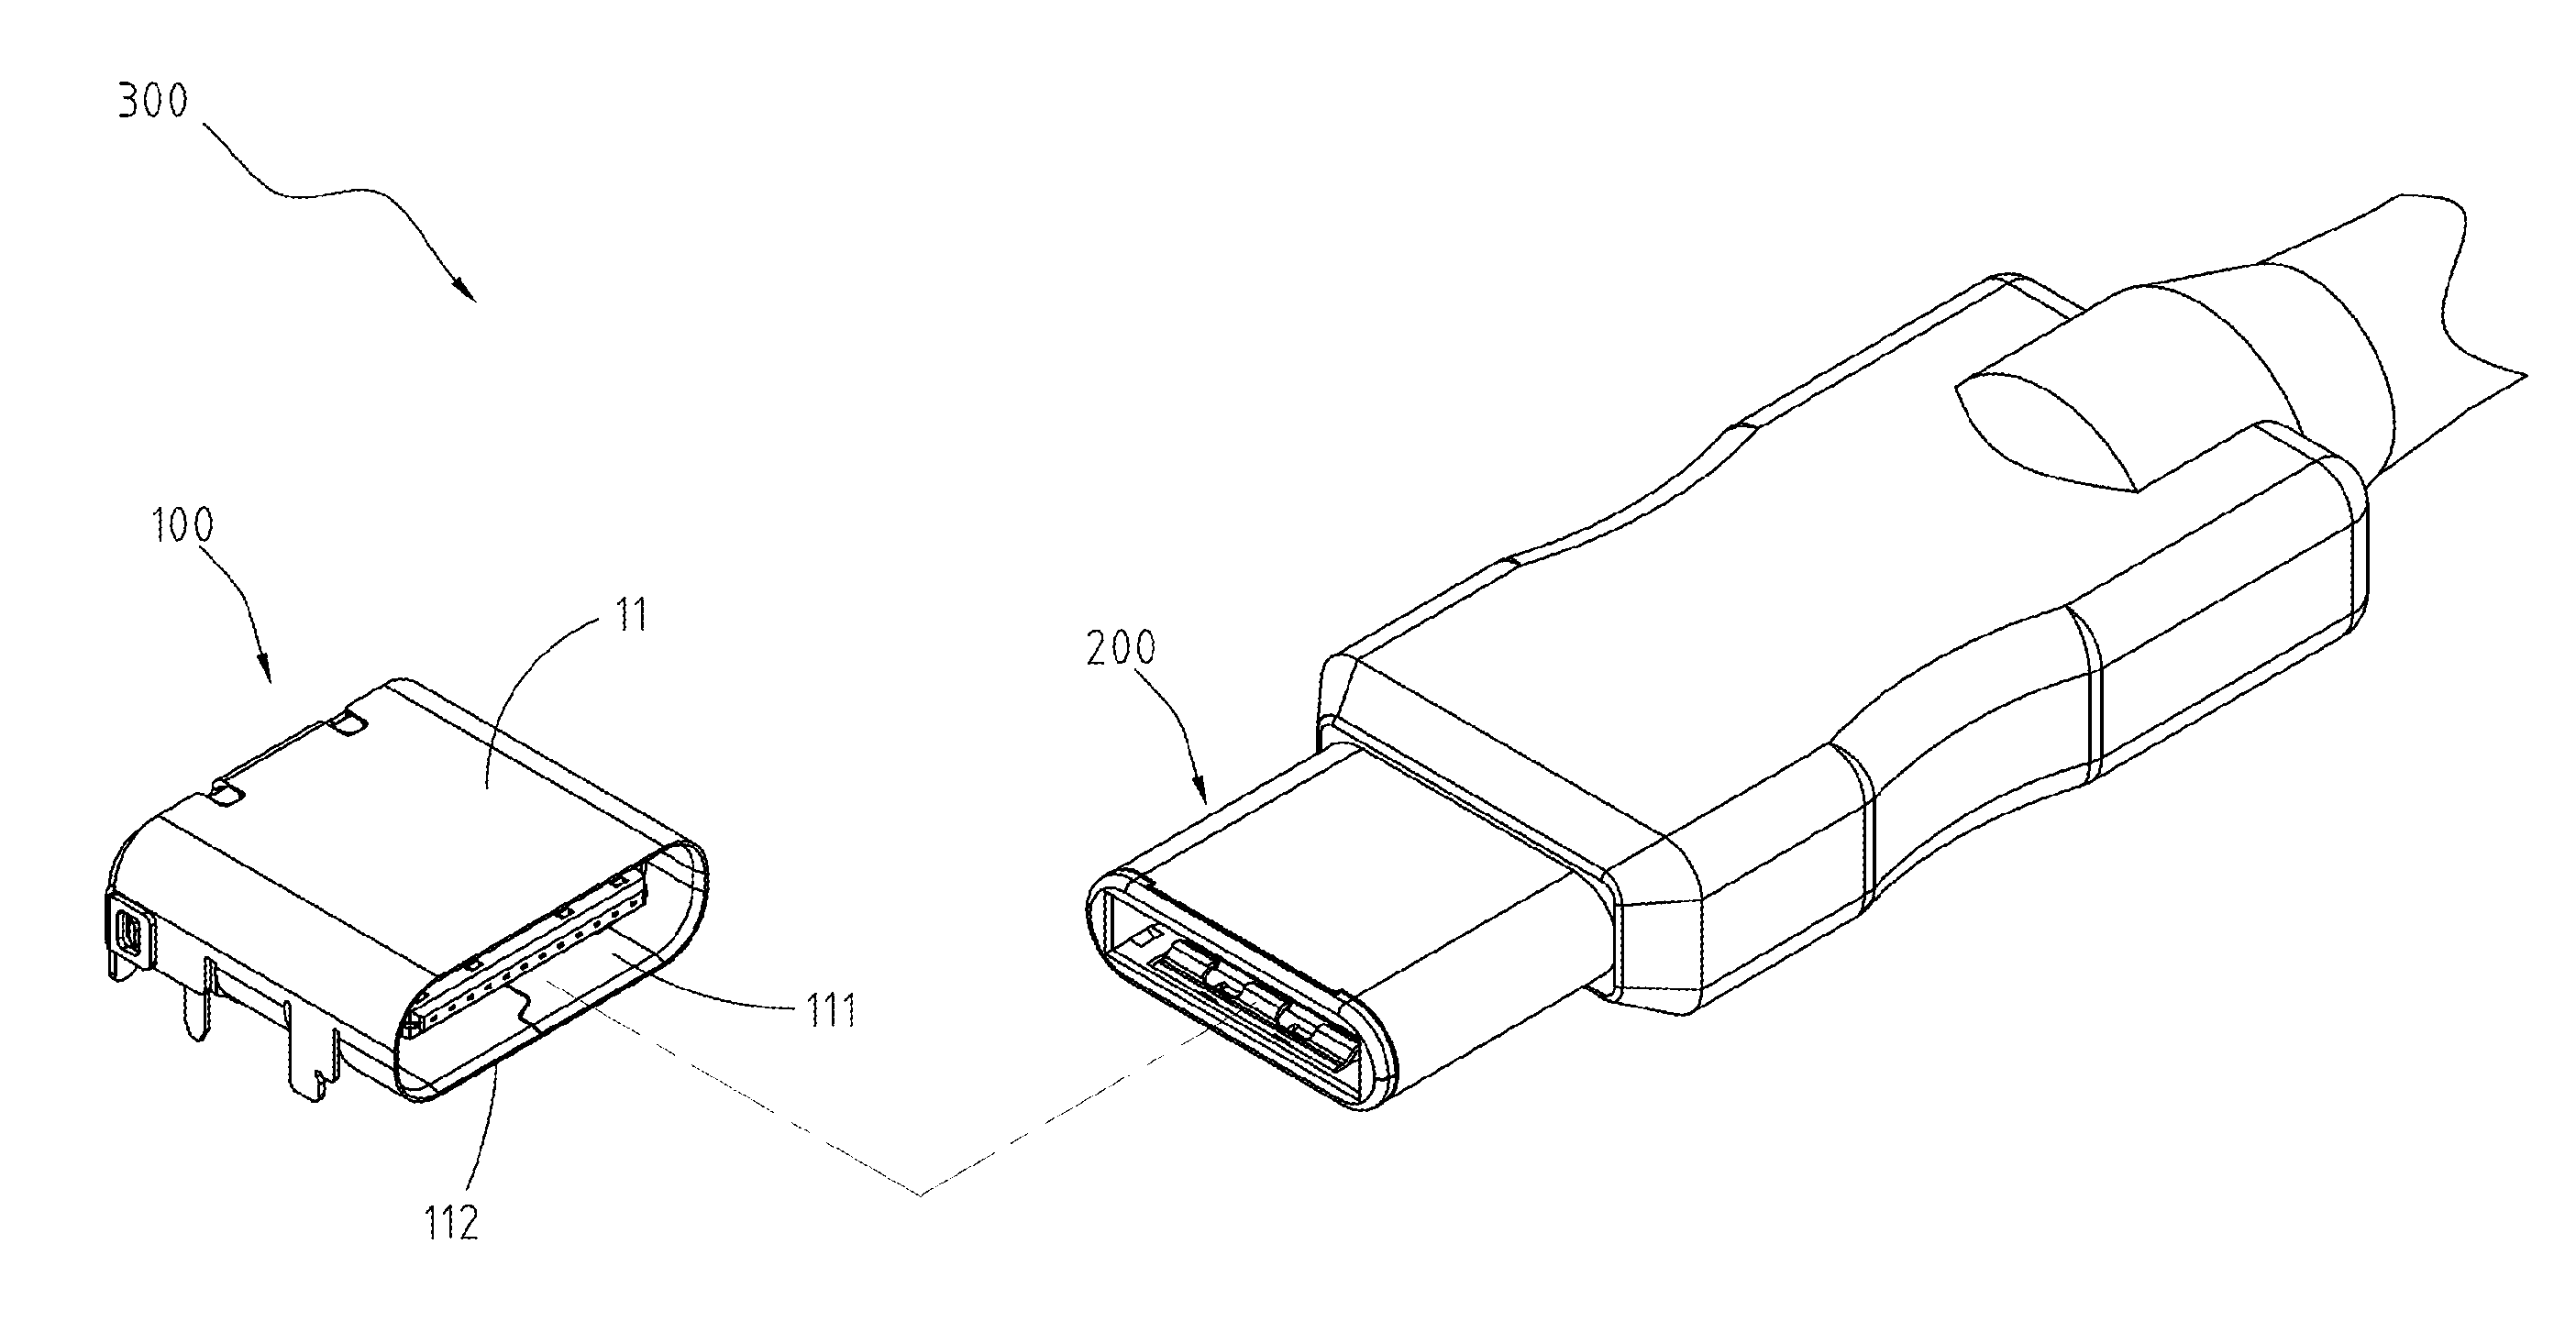 Electrical receptacle connector and electrical plug connector